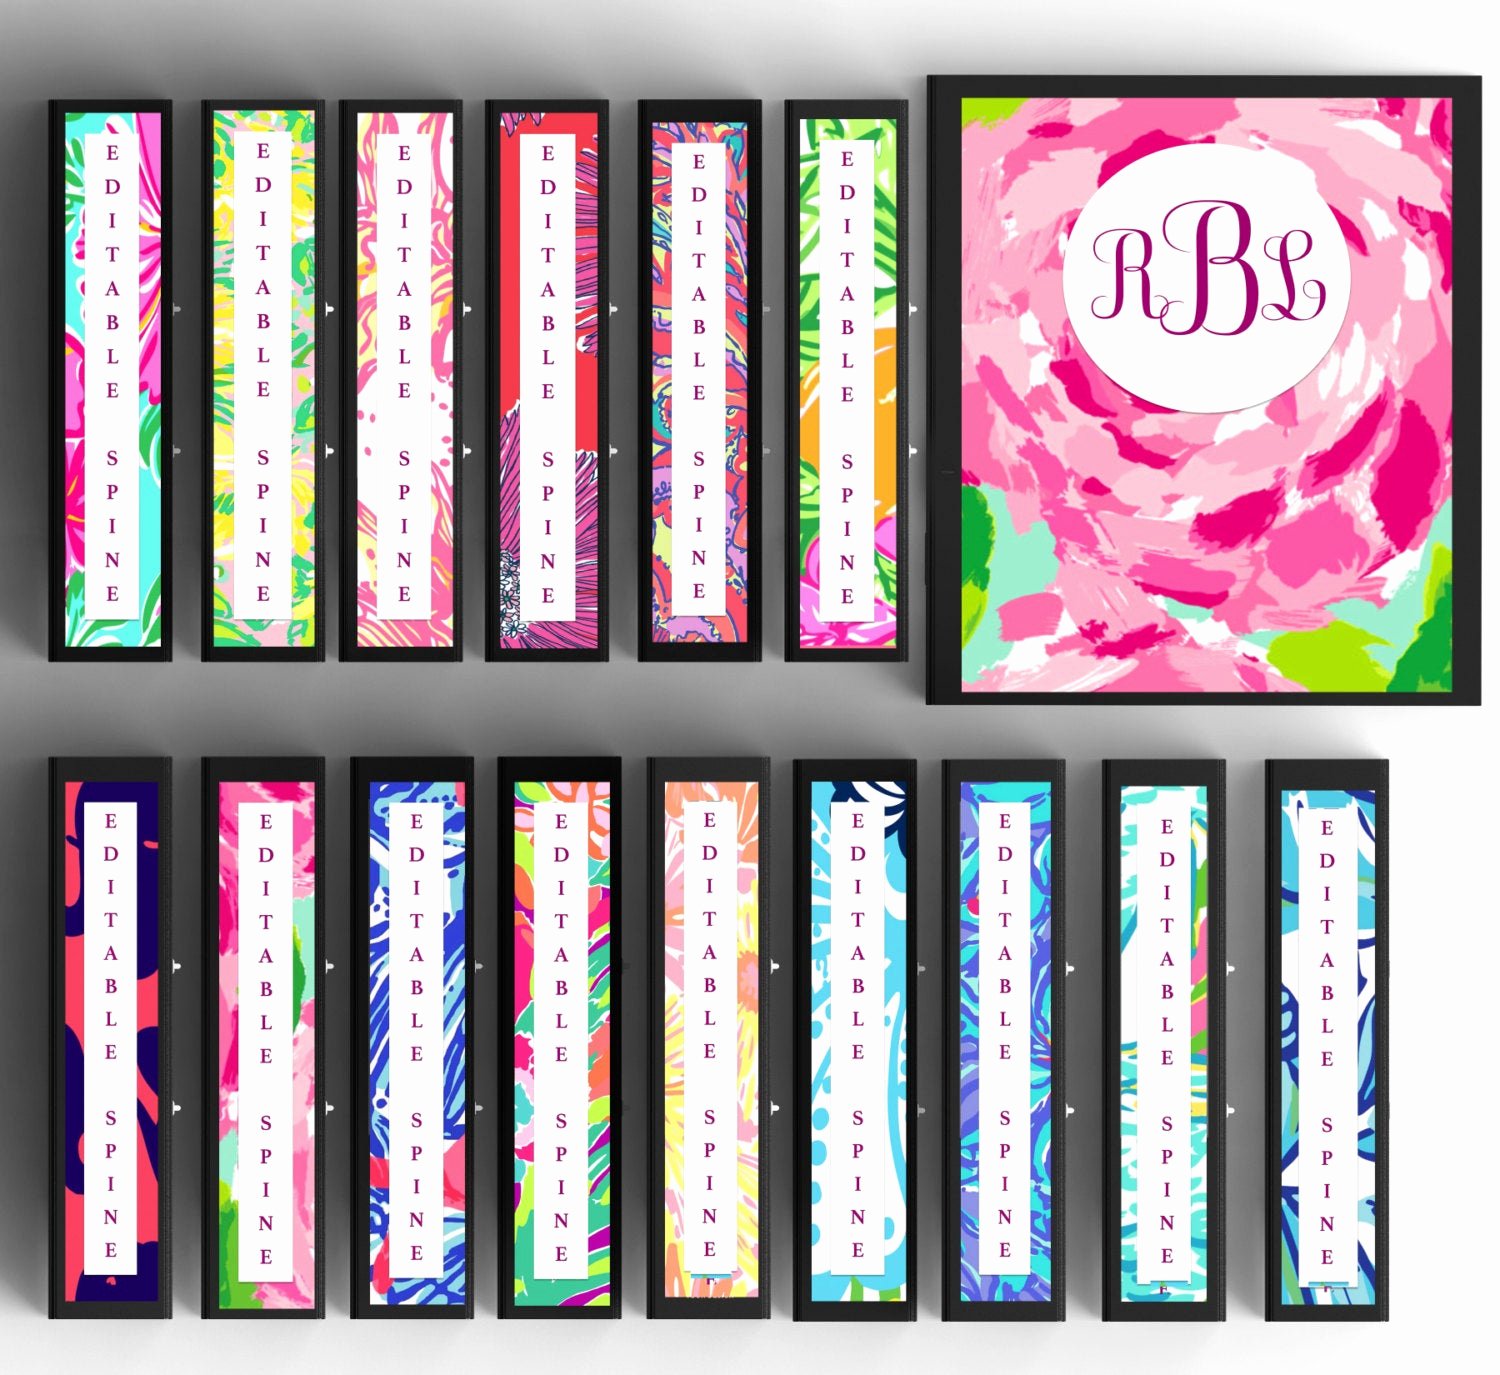 Binder Label Template Free New Set Of 15 Monogram Binder Covers Lilly Pulitzer Inspired